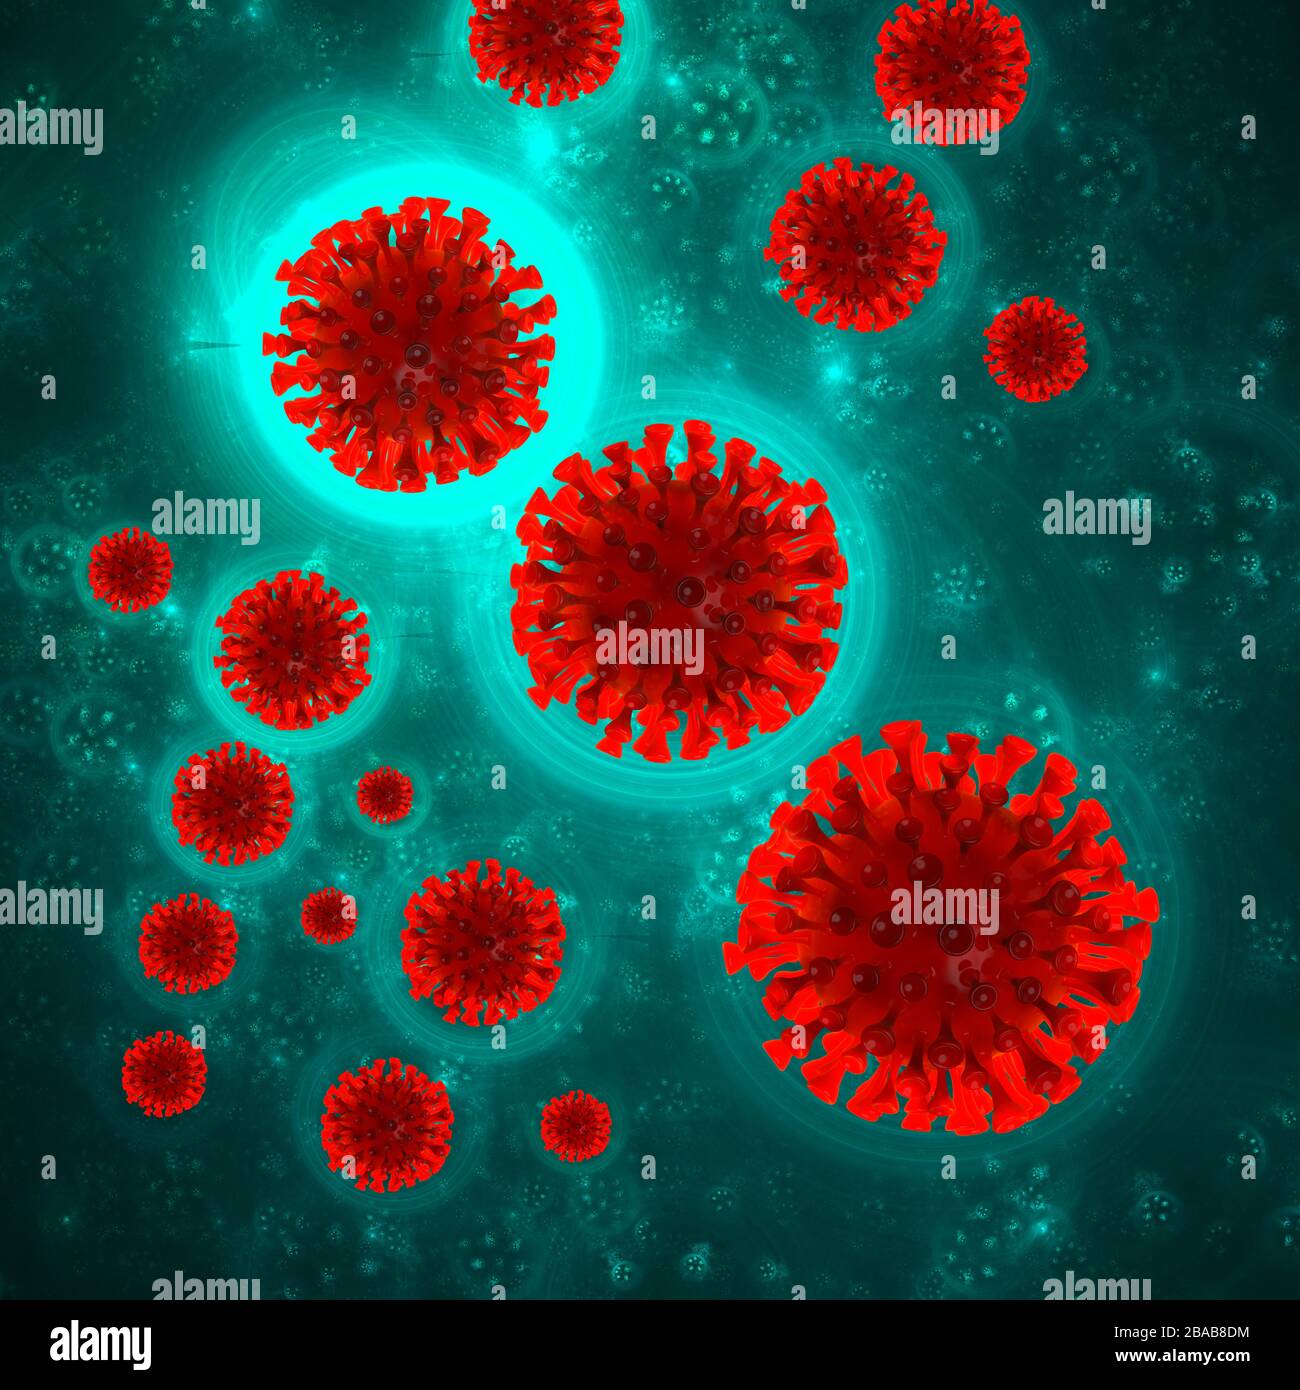 Coronavirus Wuhan, China COVID-19 background with corona cells molecules around. Epidemic condition 3d illustration on green background with copyspace Stock Photo